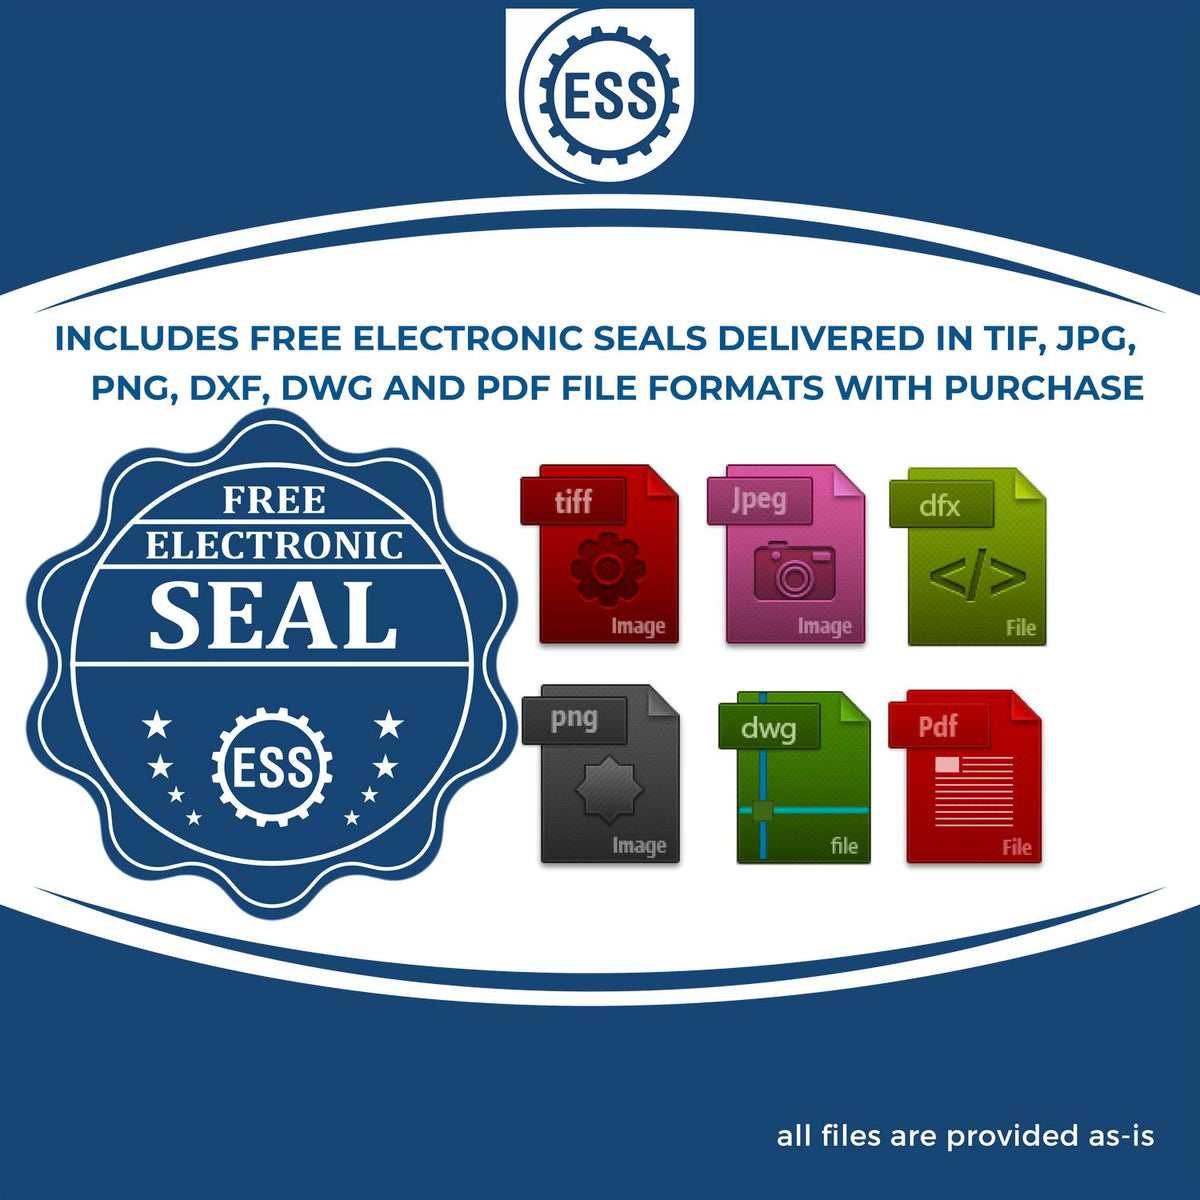 An infographic for the free electronic seal for the Self-Inking New Hampshire PE Stamp illustrating the different file type icons such as DXF, DWG, TIF, JPG and PNG.